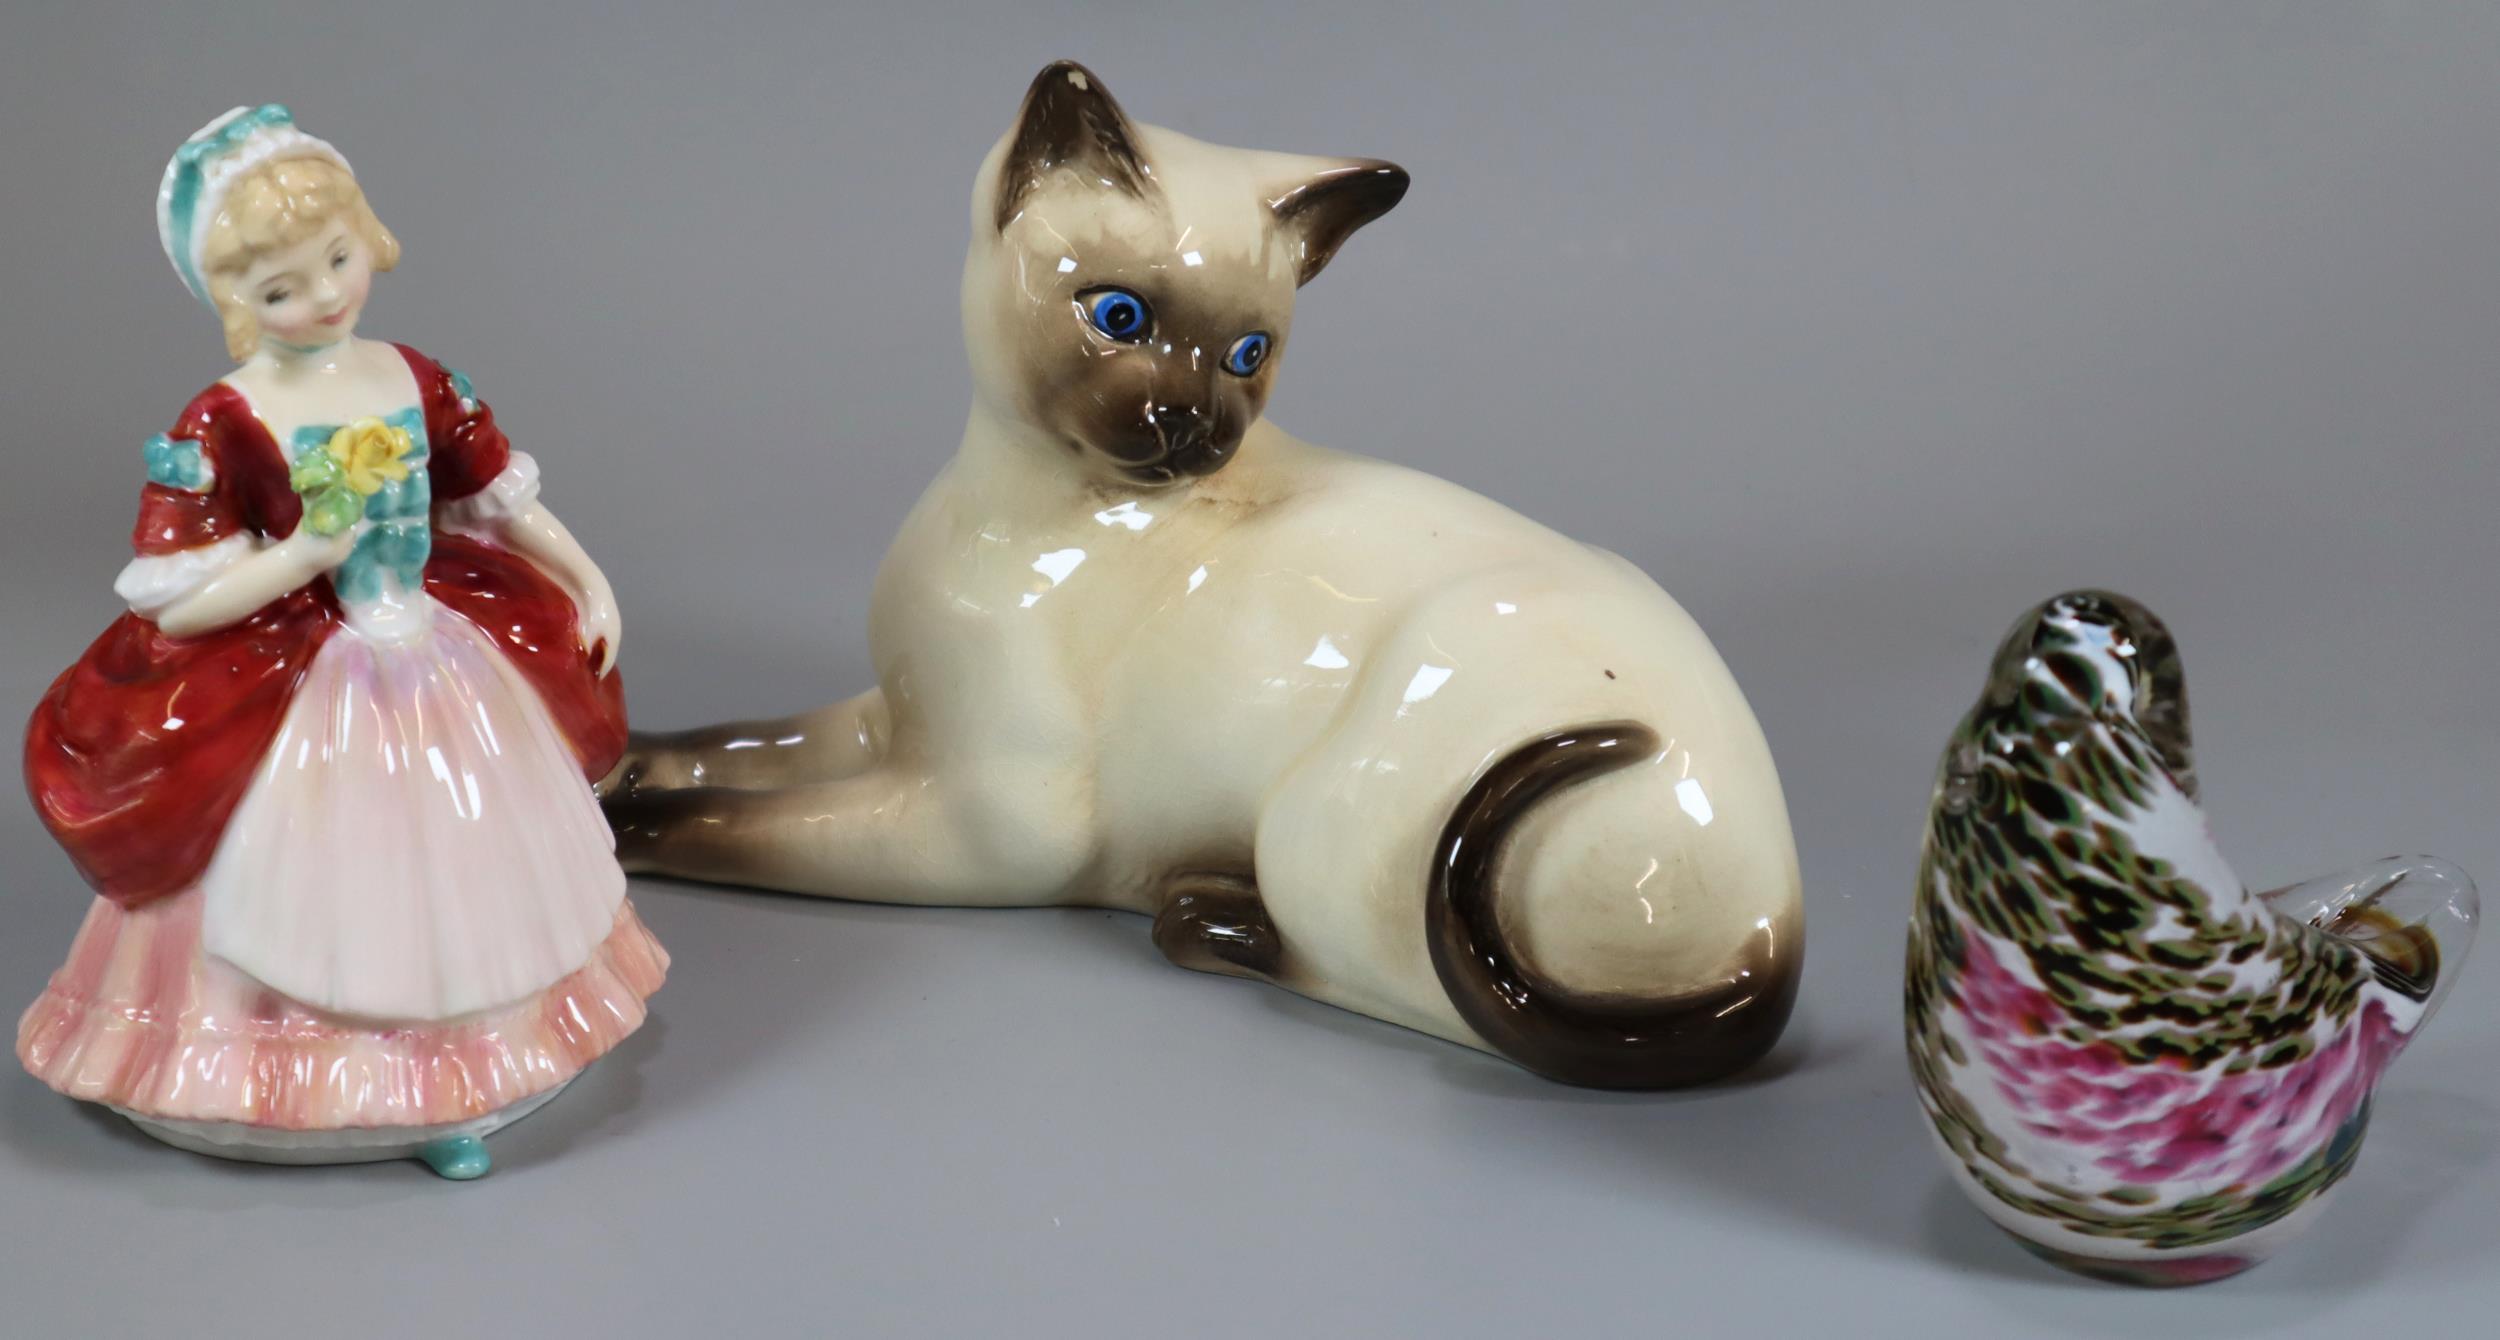 Royal Doulton bone china figurine 'Valerie' together with a Beswick 1358 Siamese recumbent cat and a